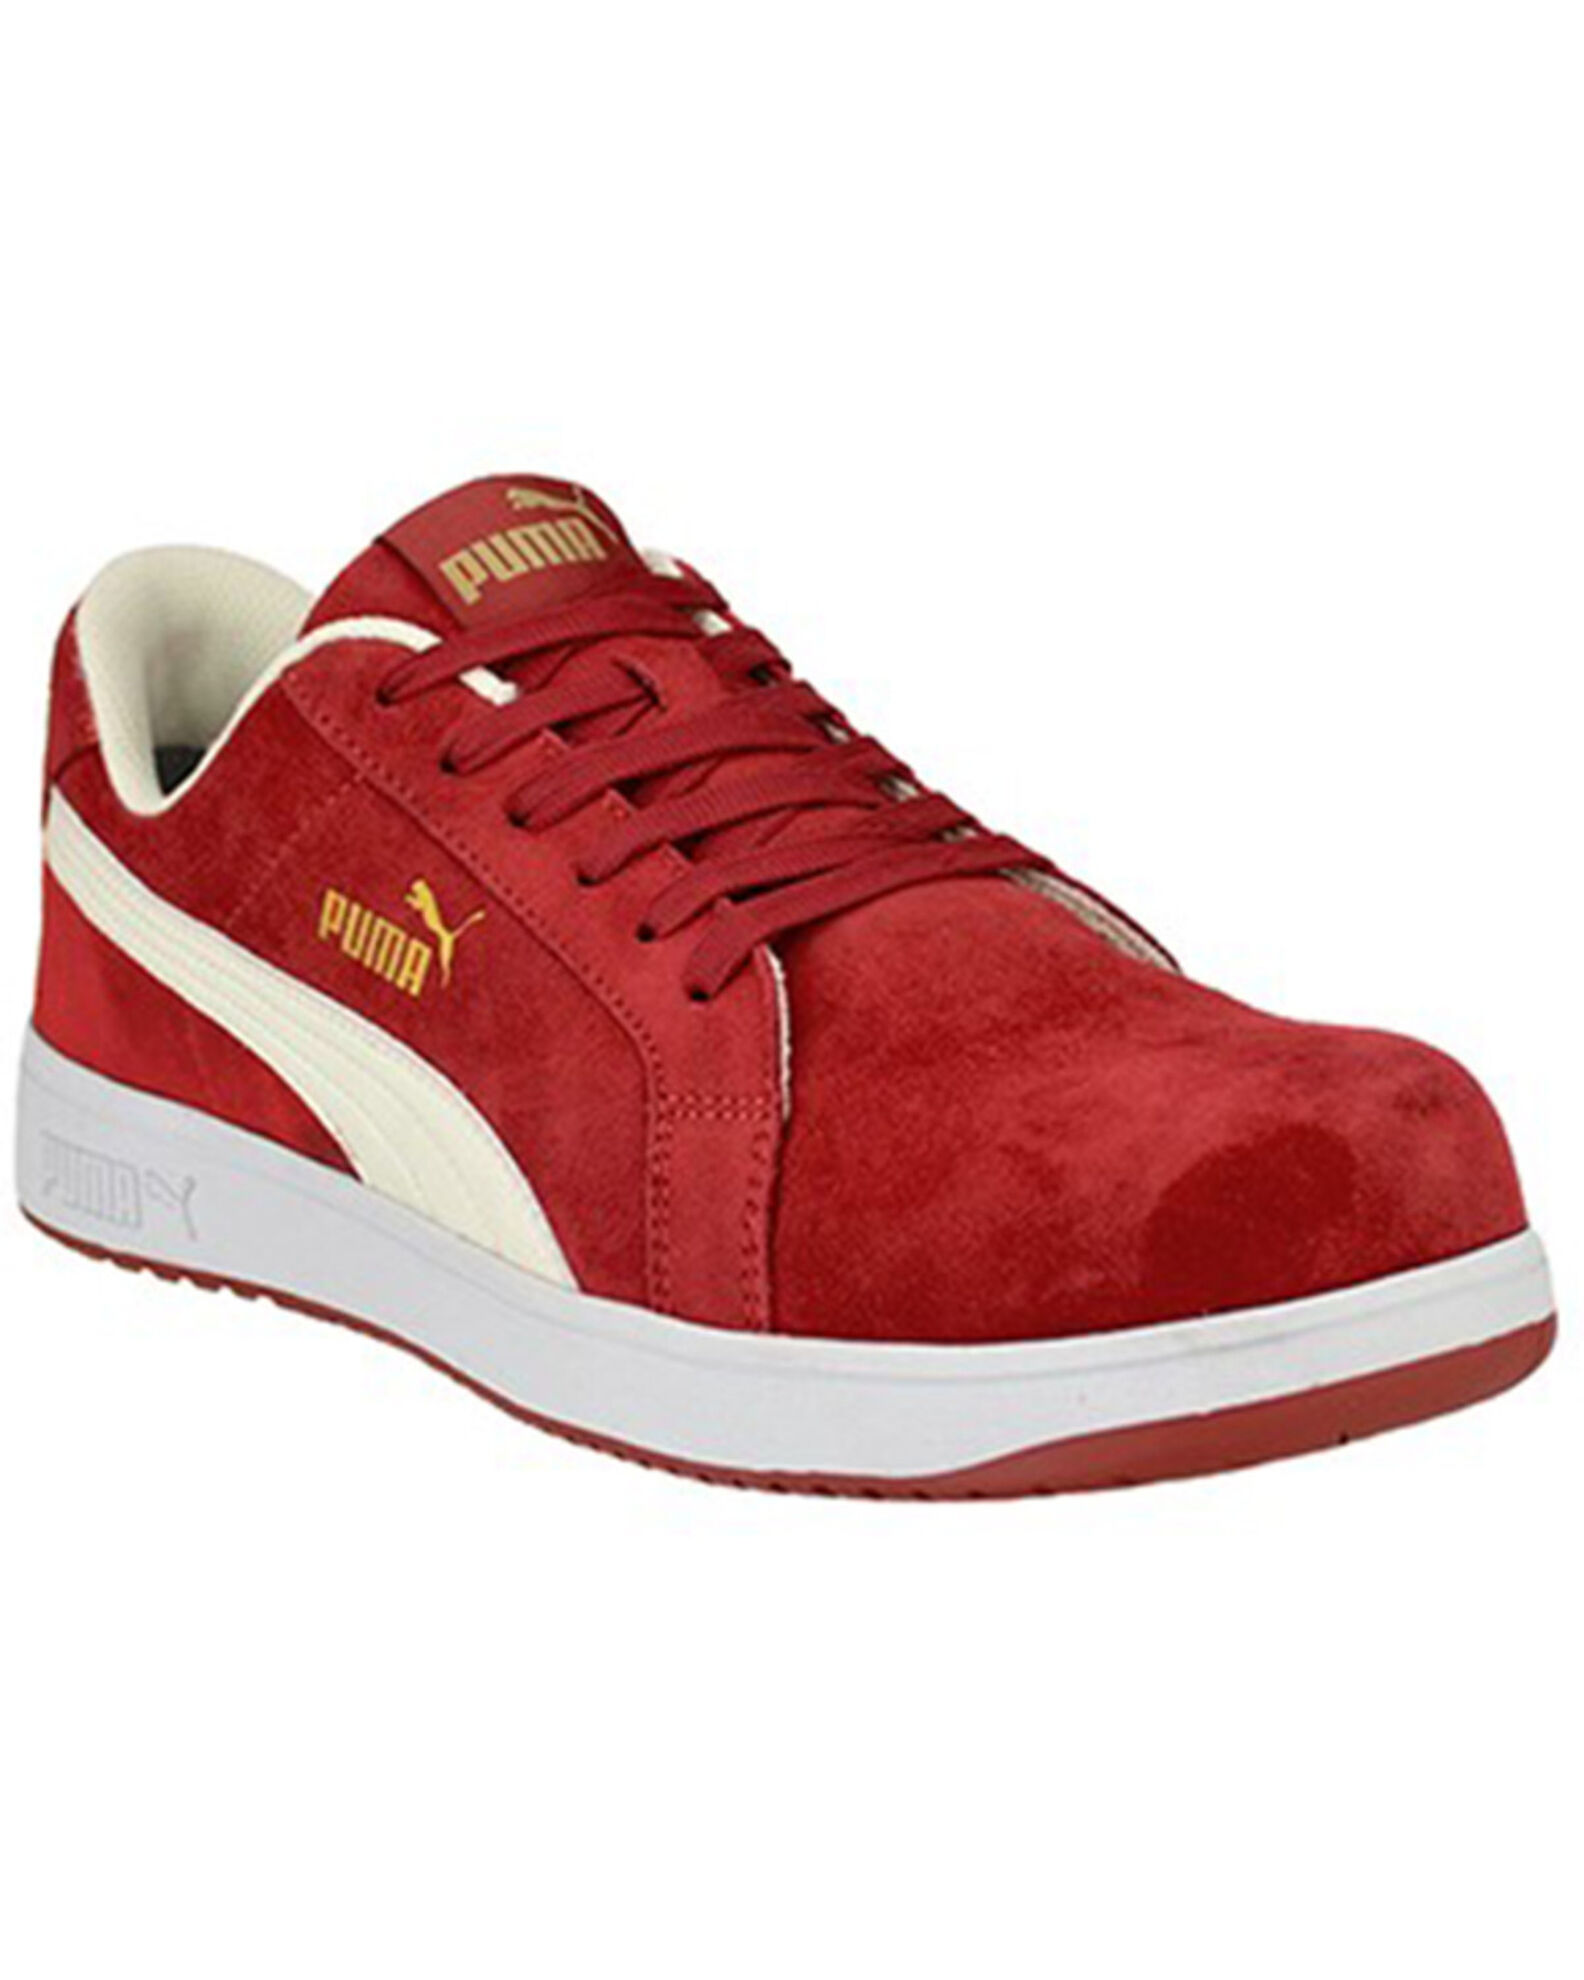 Product Name: Puma Safety Men's Iconic Work Shoes - Composite Toe